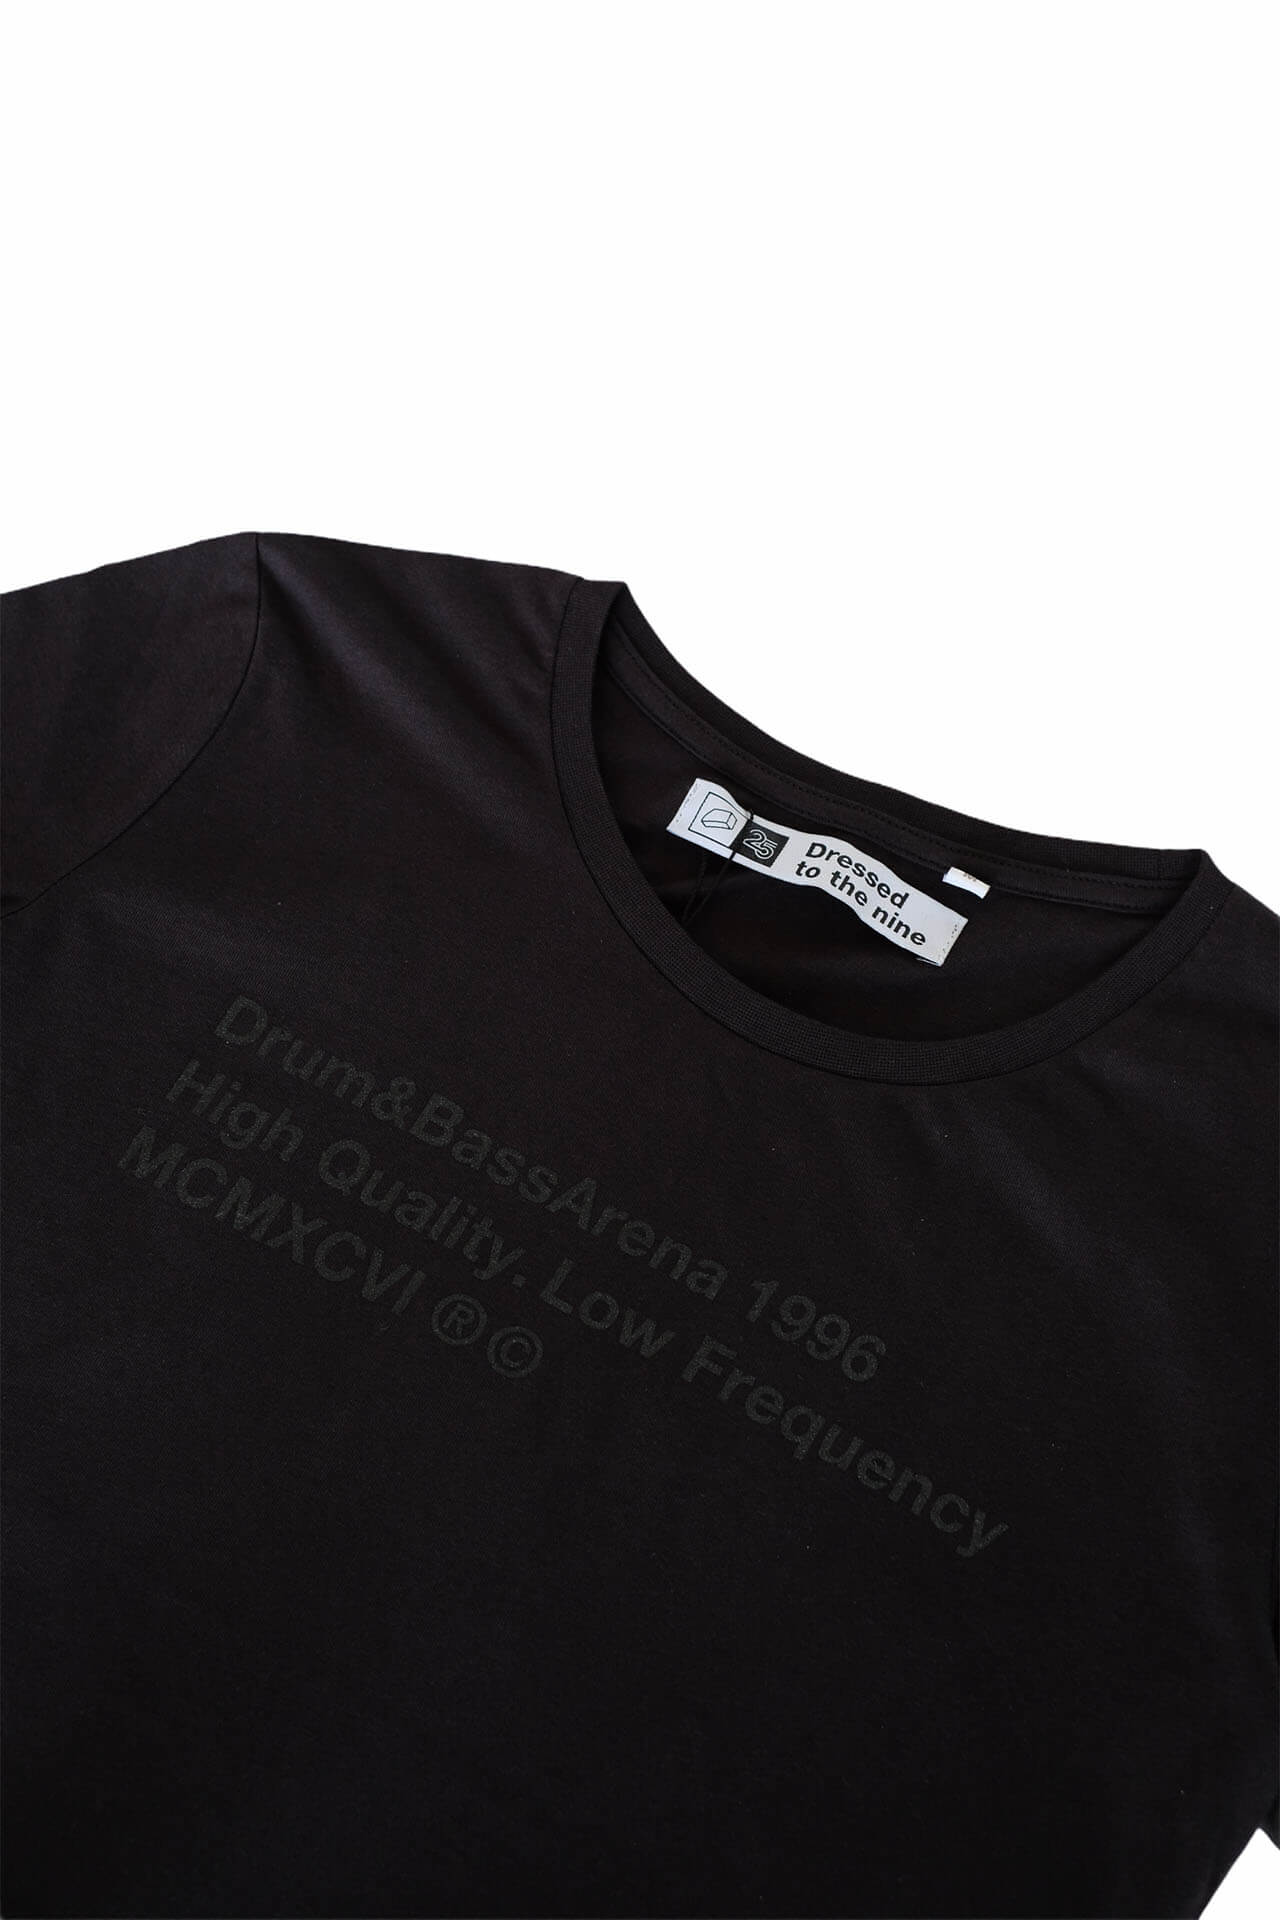 Limited Edition 25 Years Stealth T-shirt (Women's)